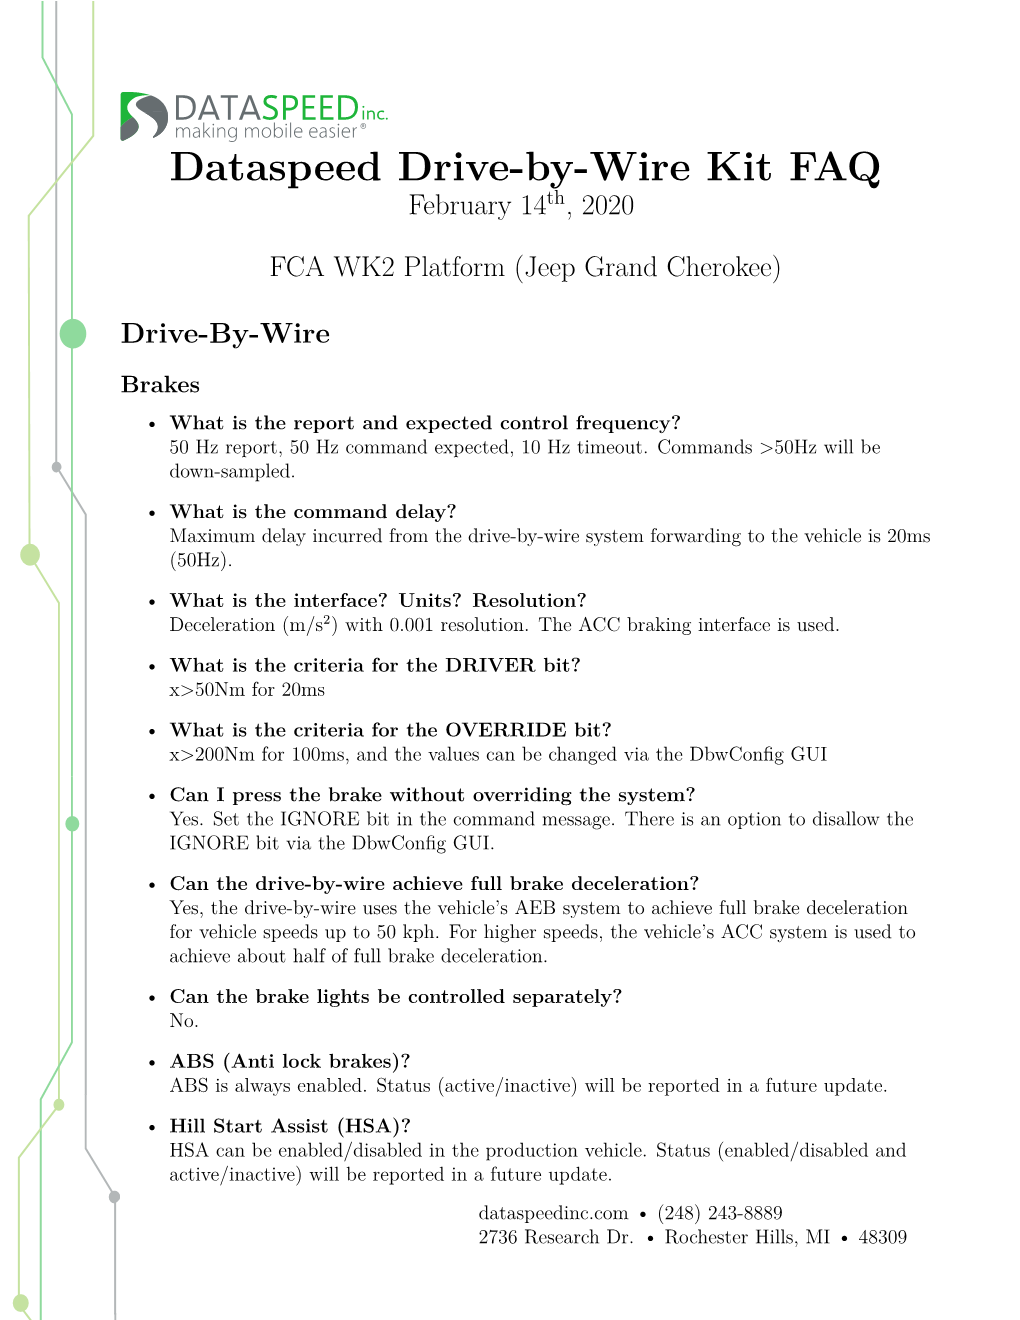 Dataspeed Drive-By-Wire Kit FAQ February 14Th, 2020